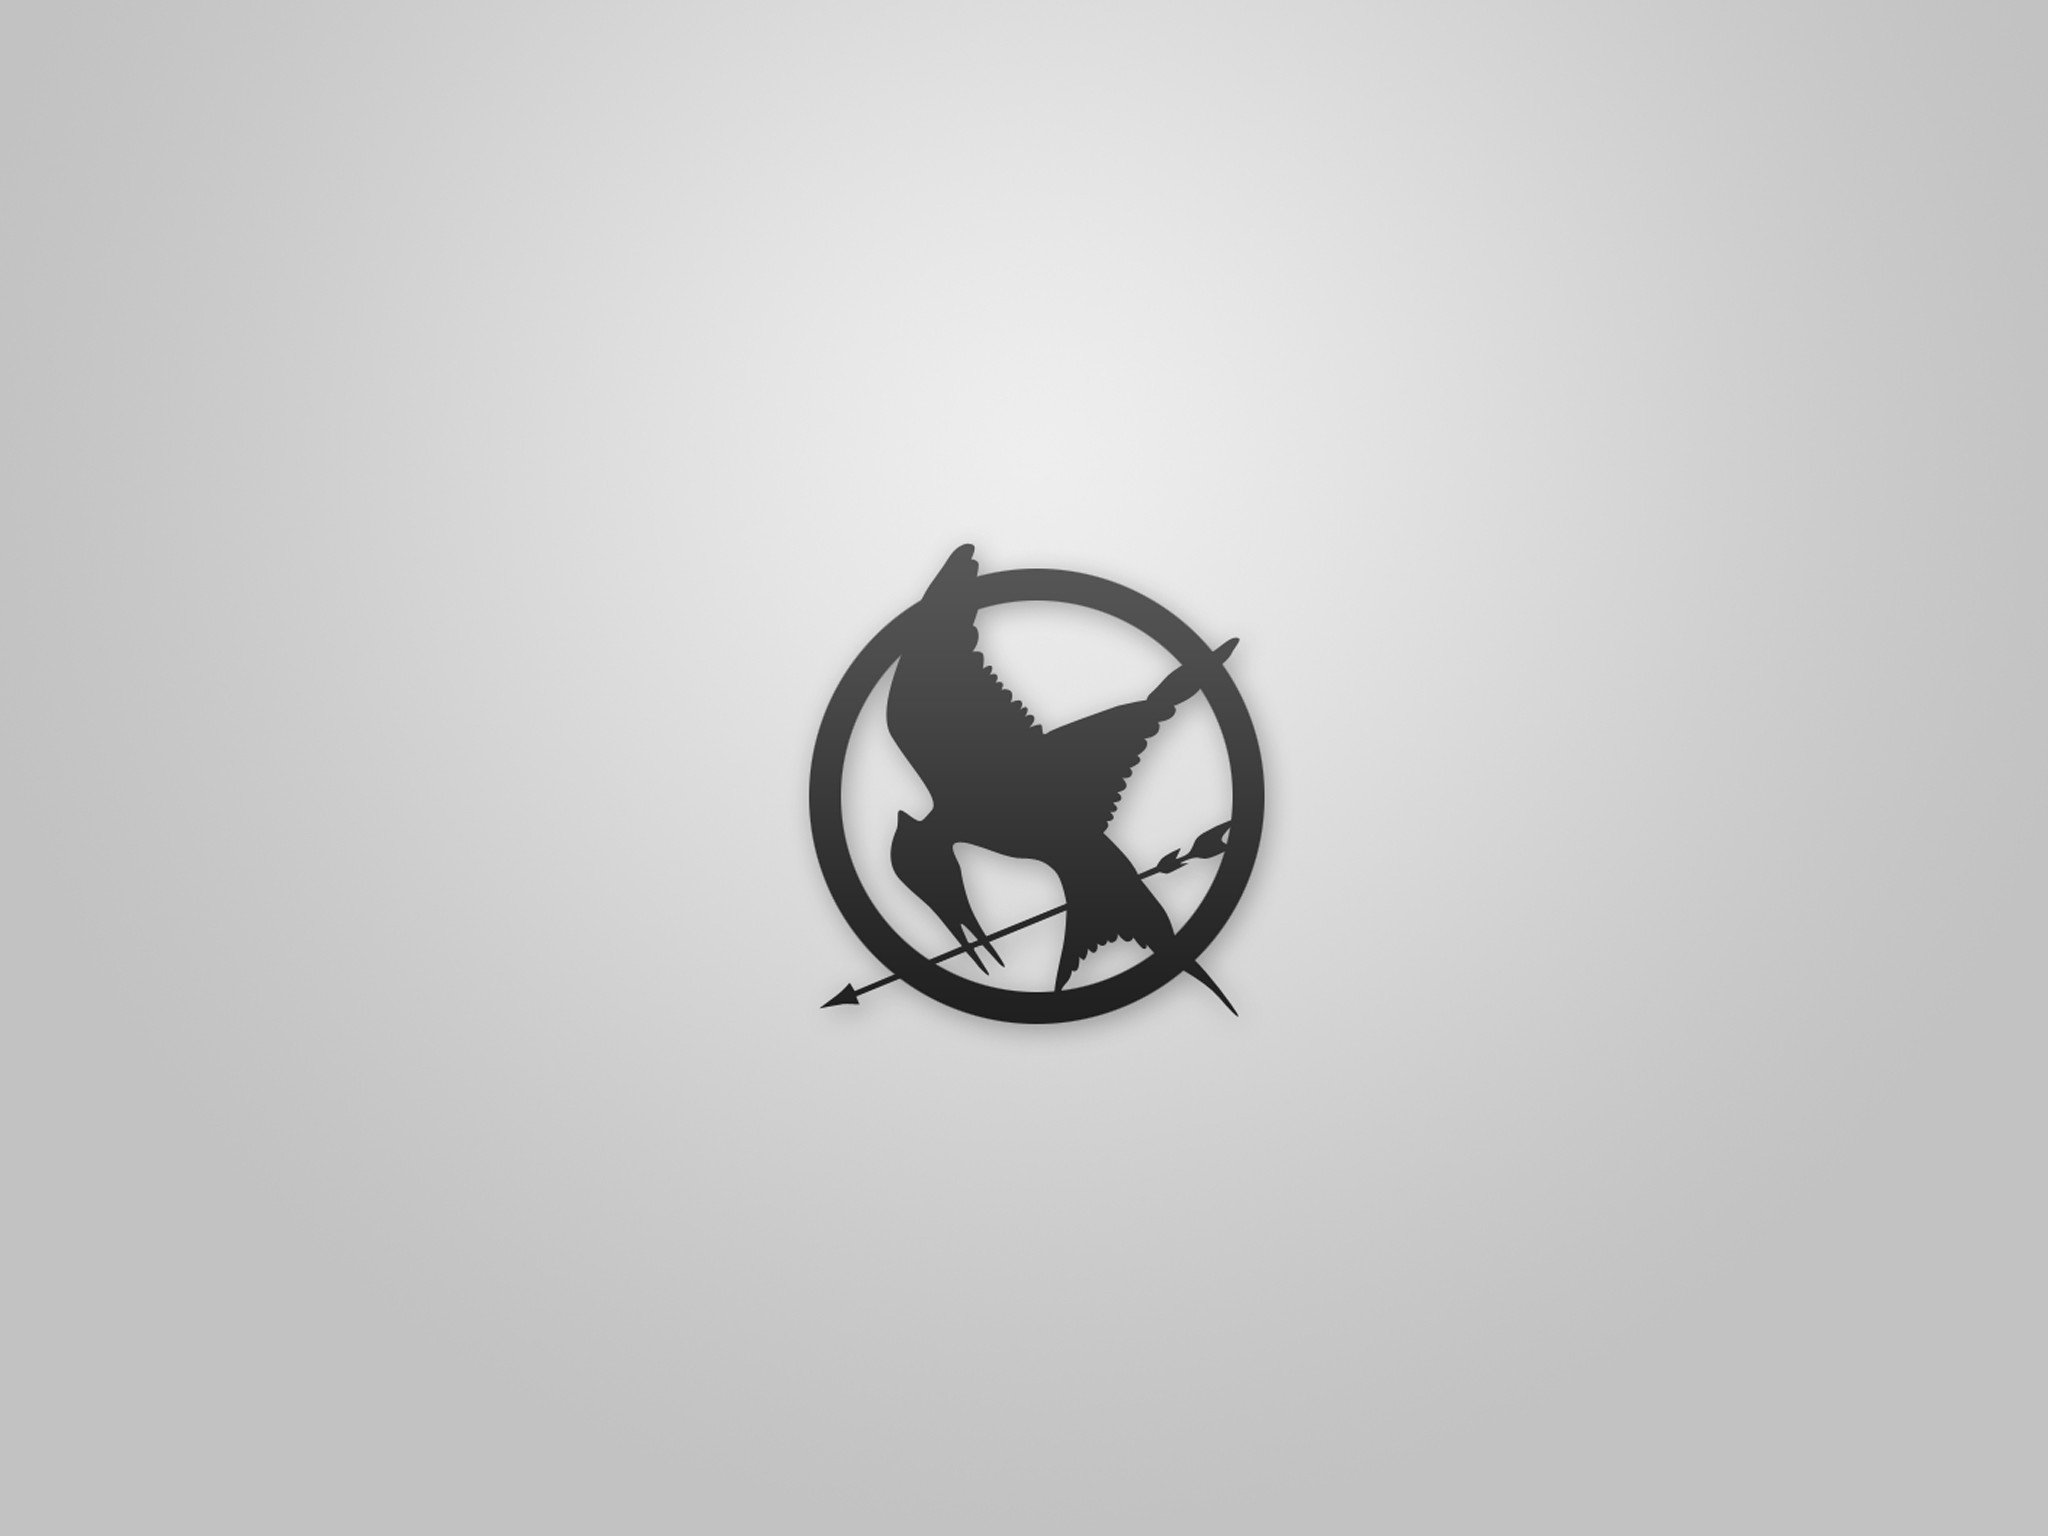 Hunger Games iPad Mini Wallpaper In Many Resolutions Bellow